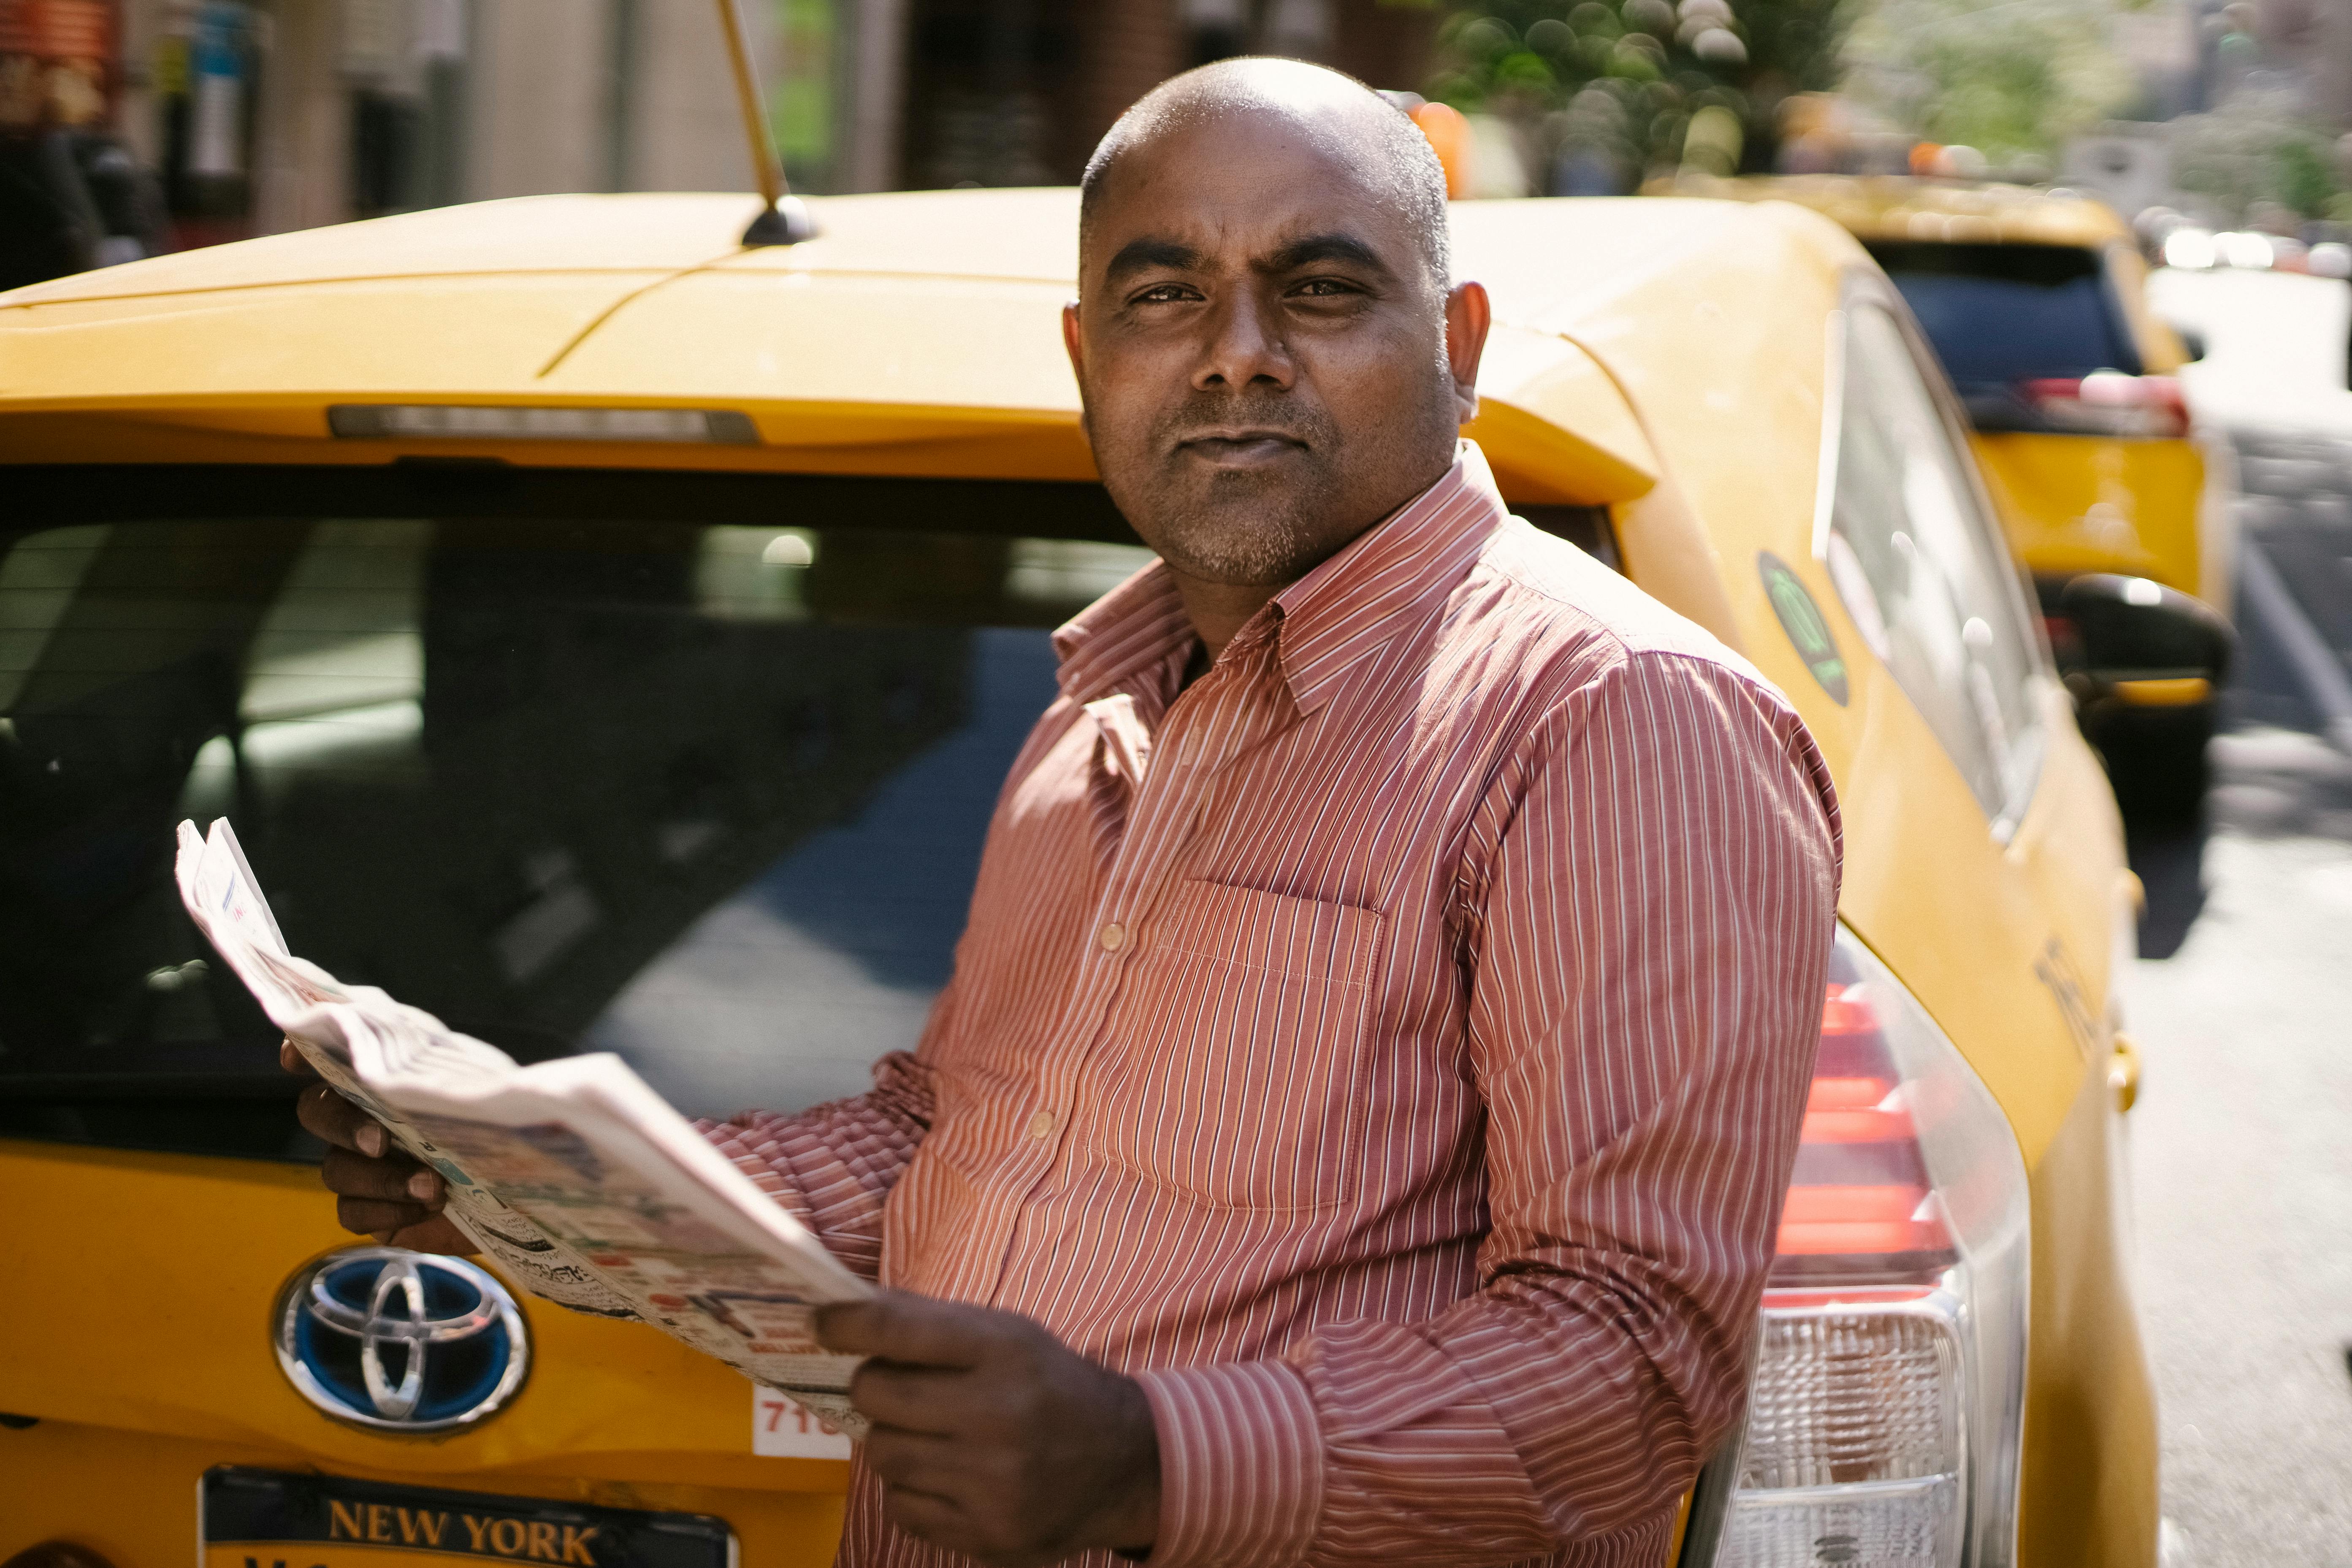 ethnic male cab driver with newspaper near vehicle in town